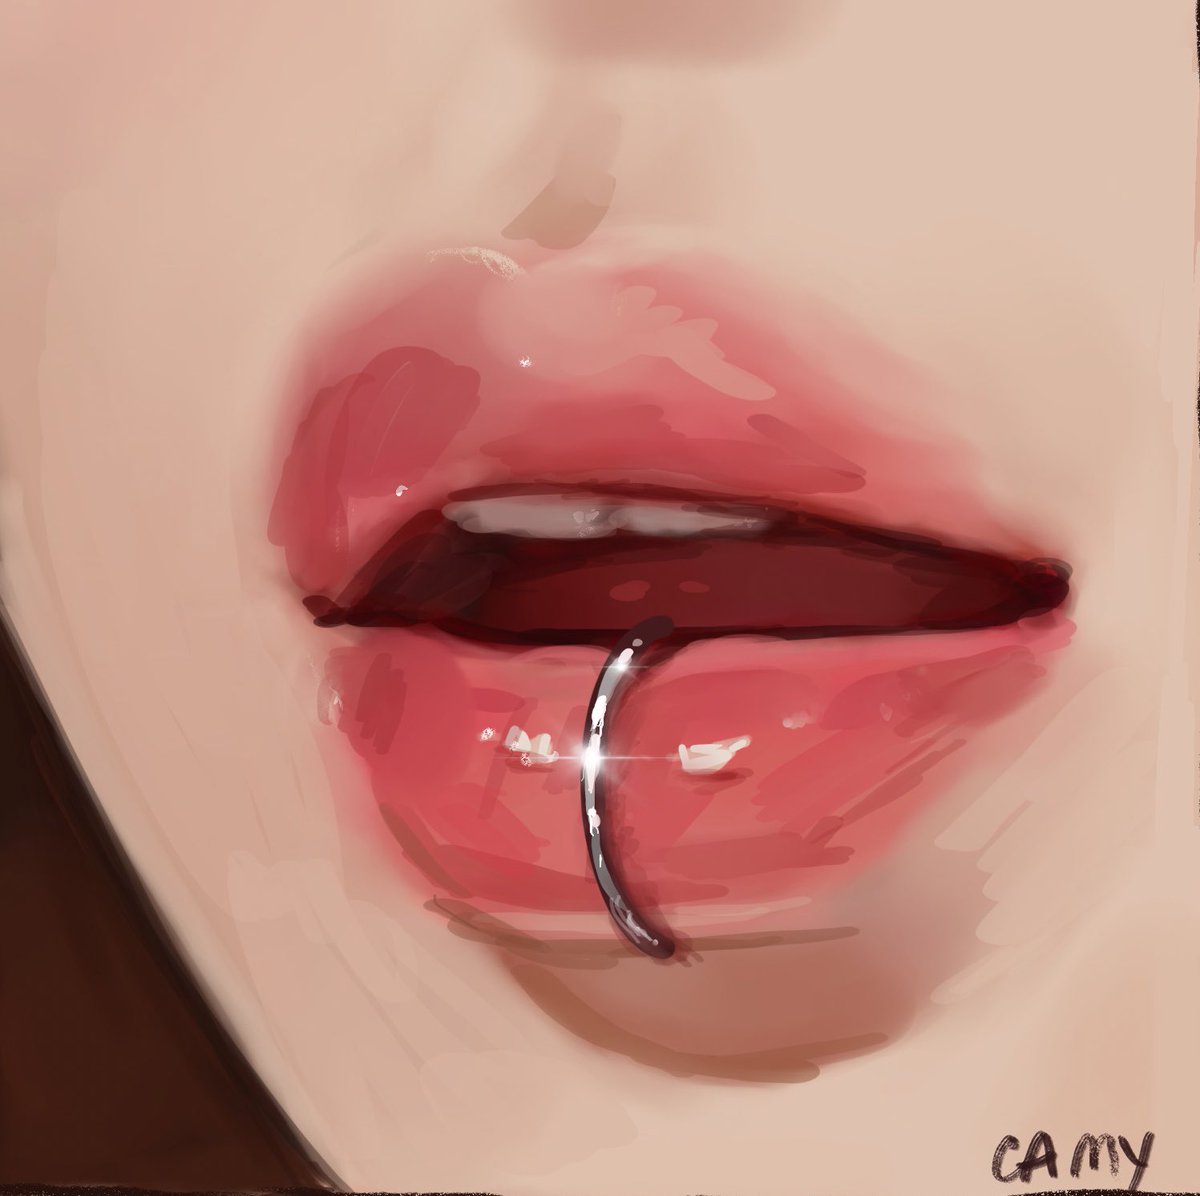 「his lips omg 」|camy 🌙のイラスト